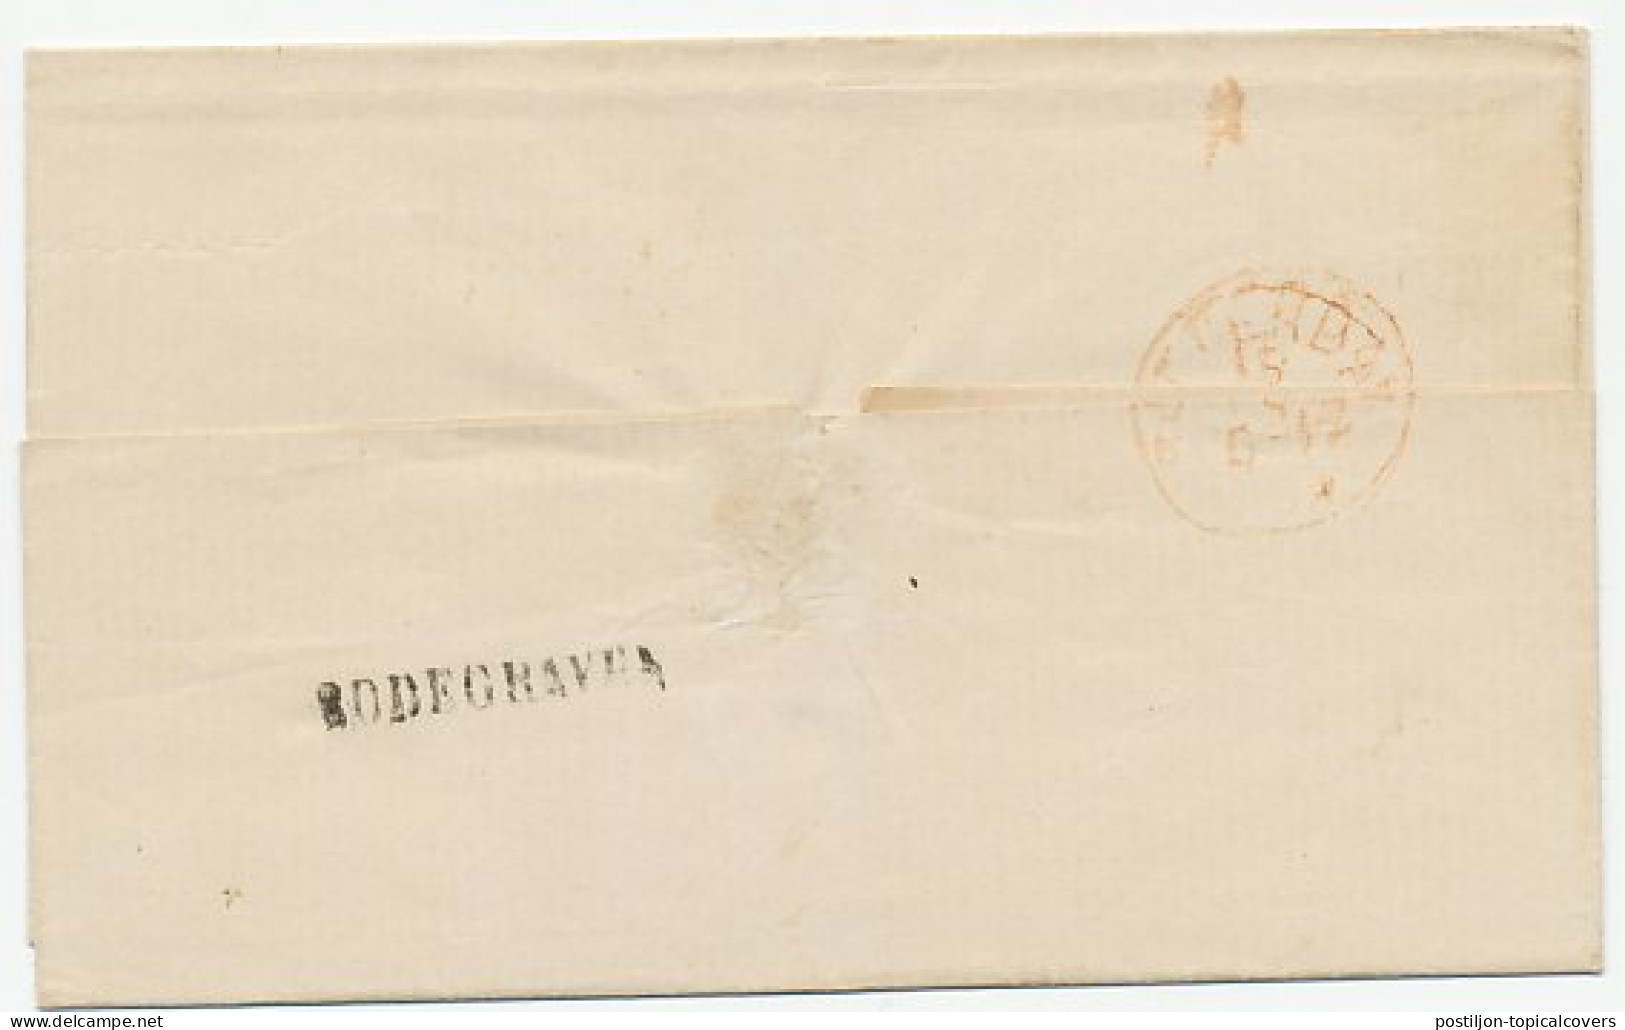 Naamstempel Bodegraven 1863 - Lettres & Documents